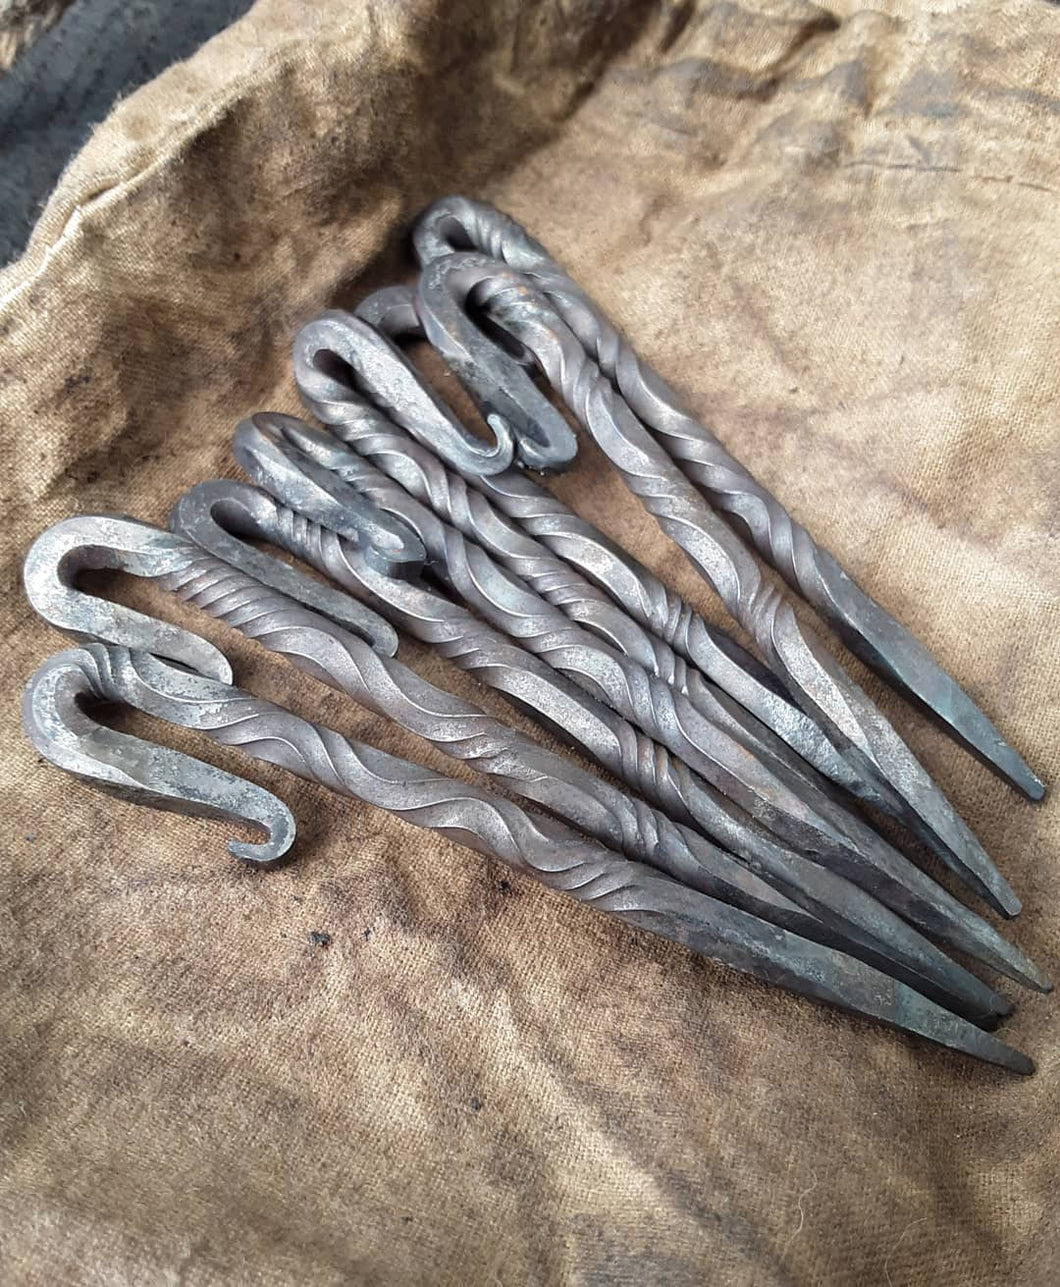 Hand-forged Awl